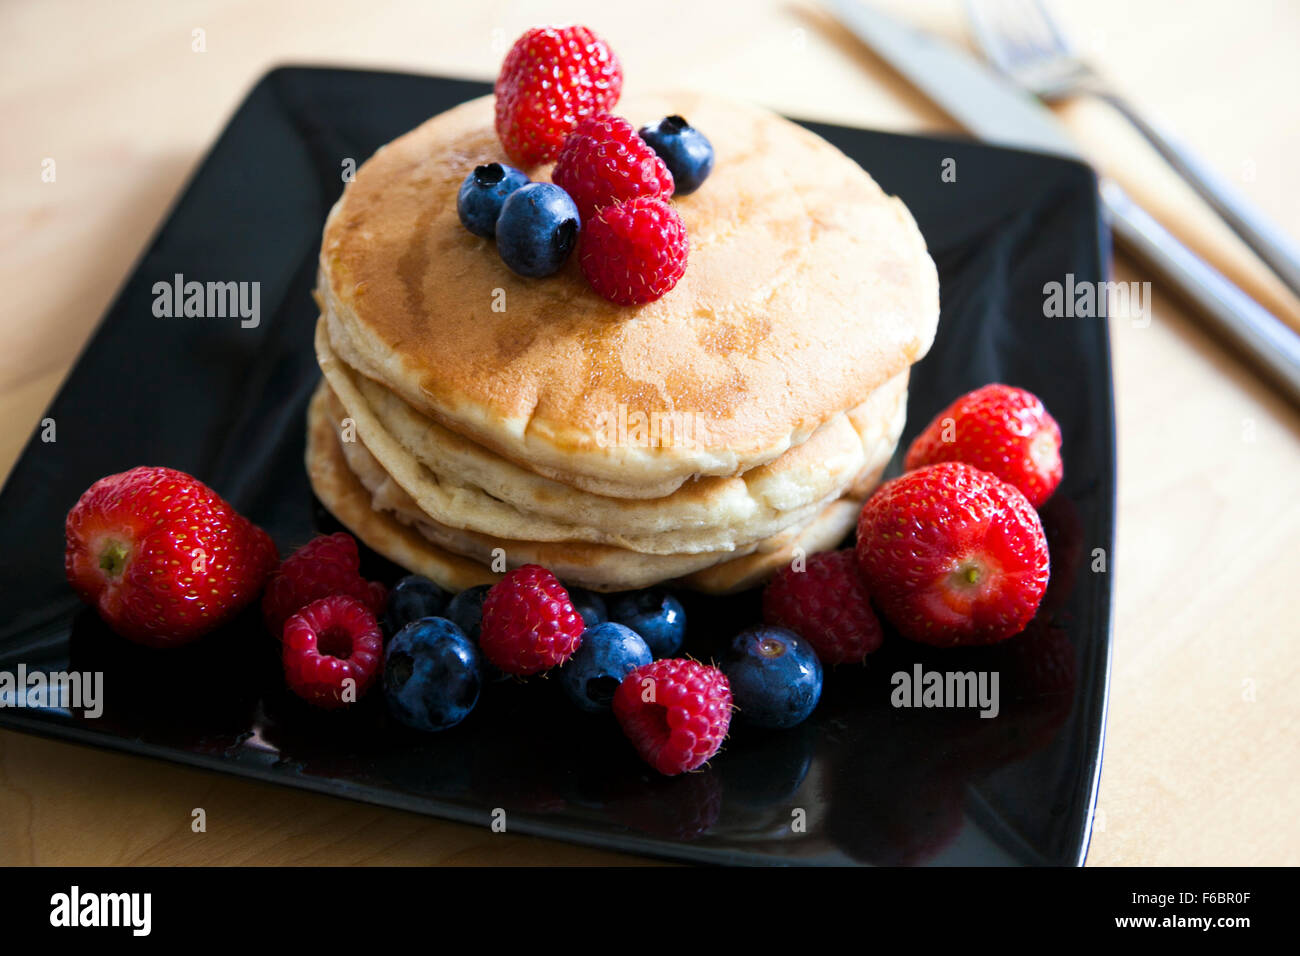 Fluffy pancakes with strawberries, blueberries, raspberries and maple syrup Stock Photo